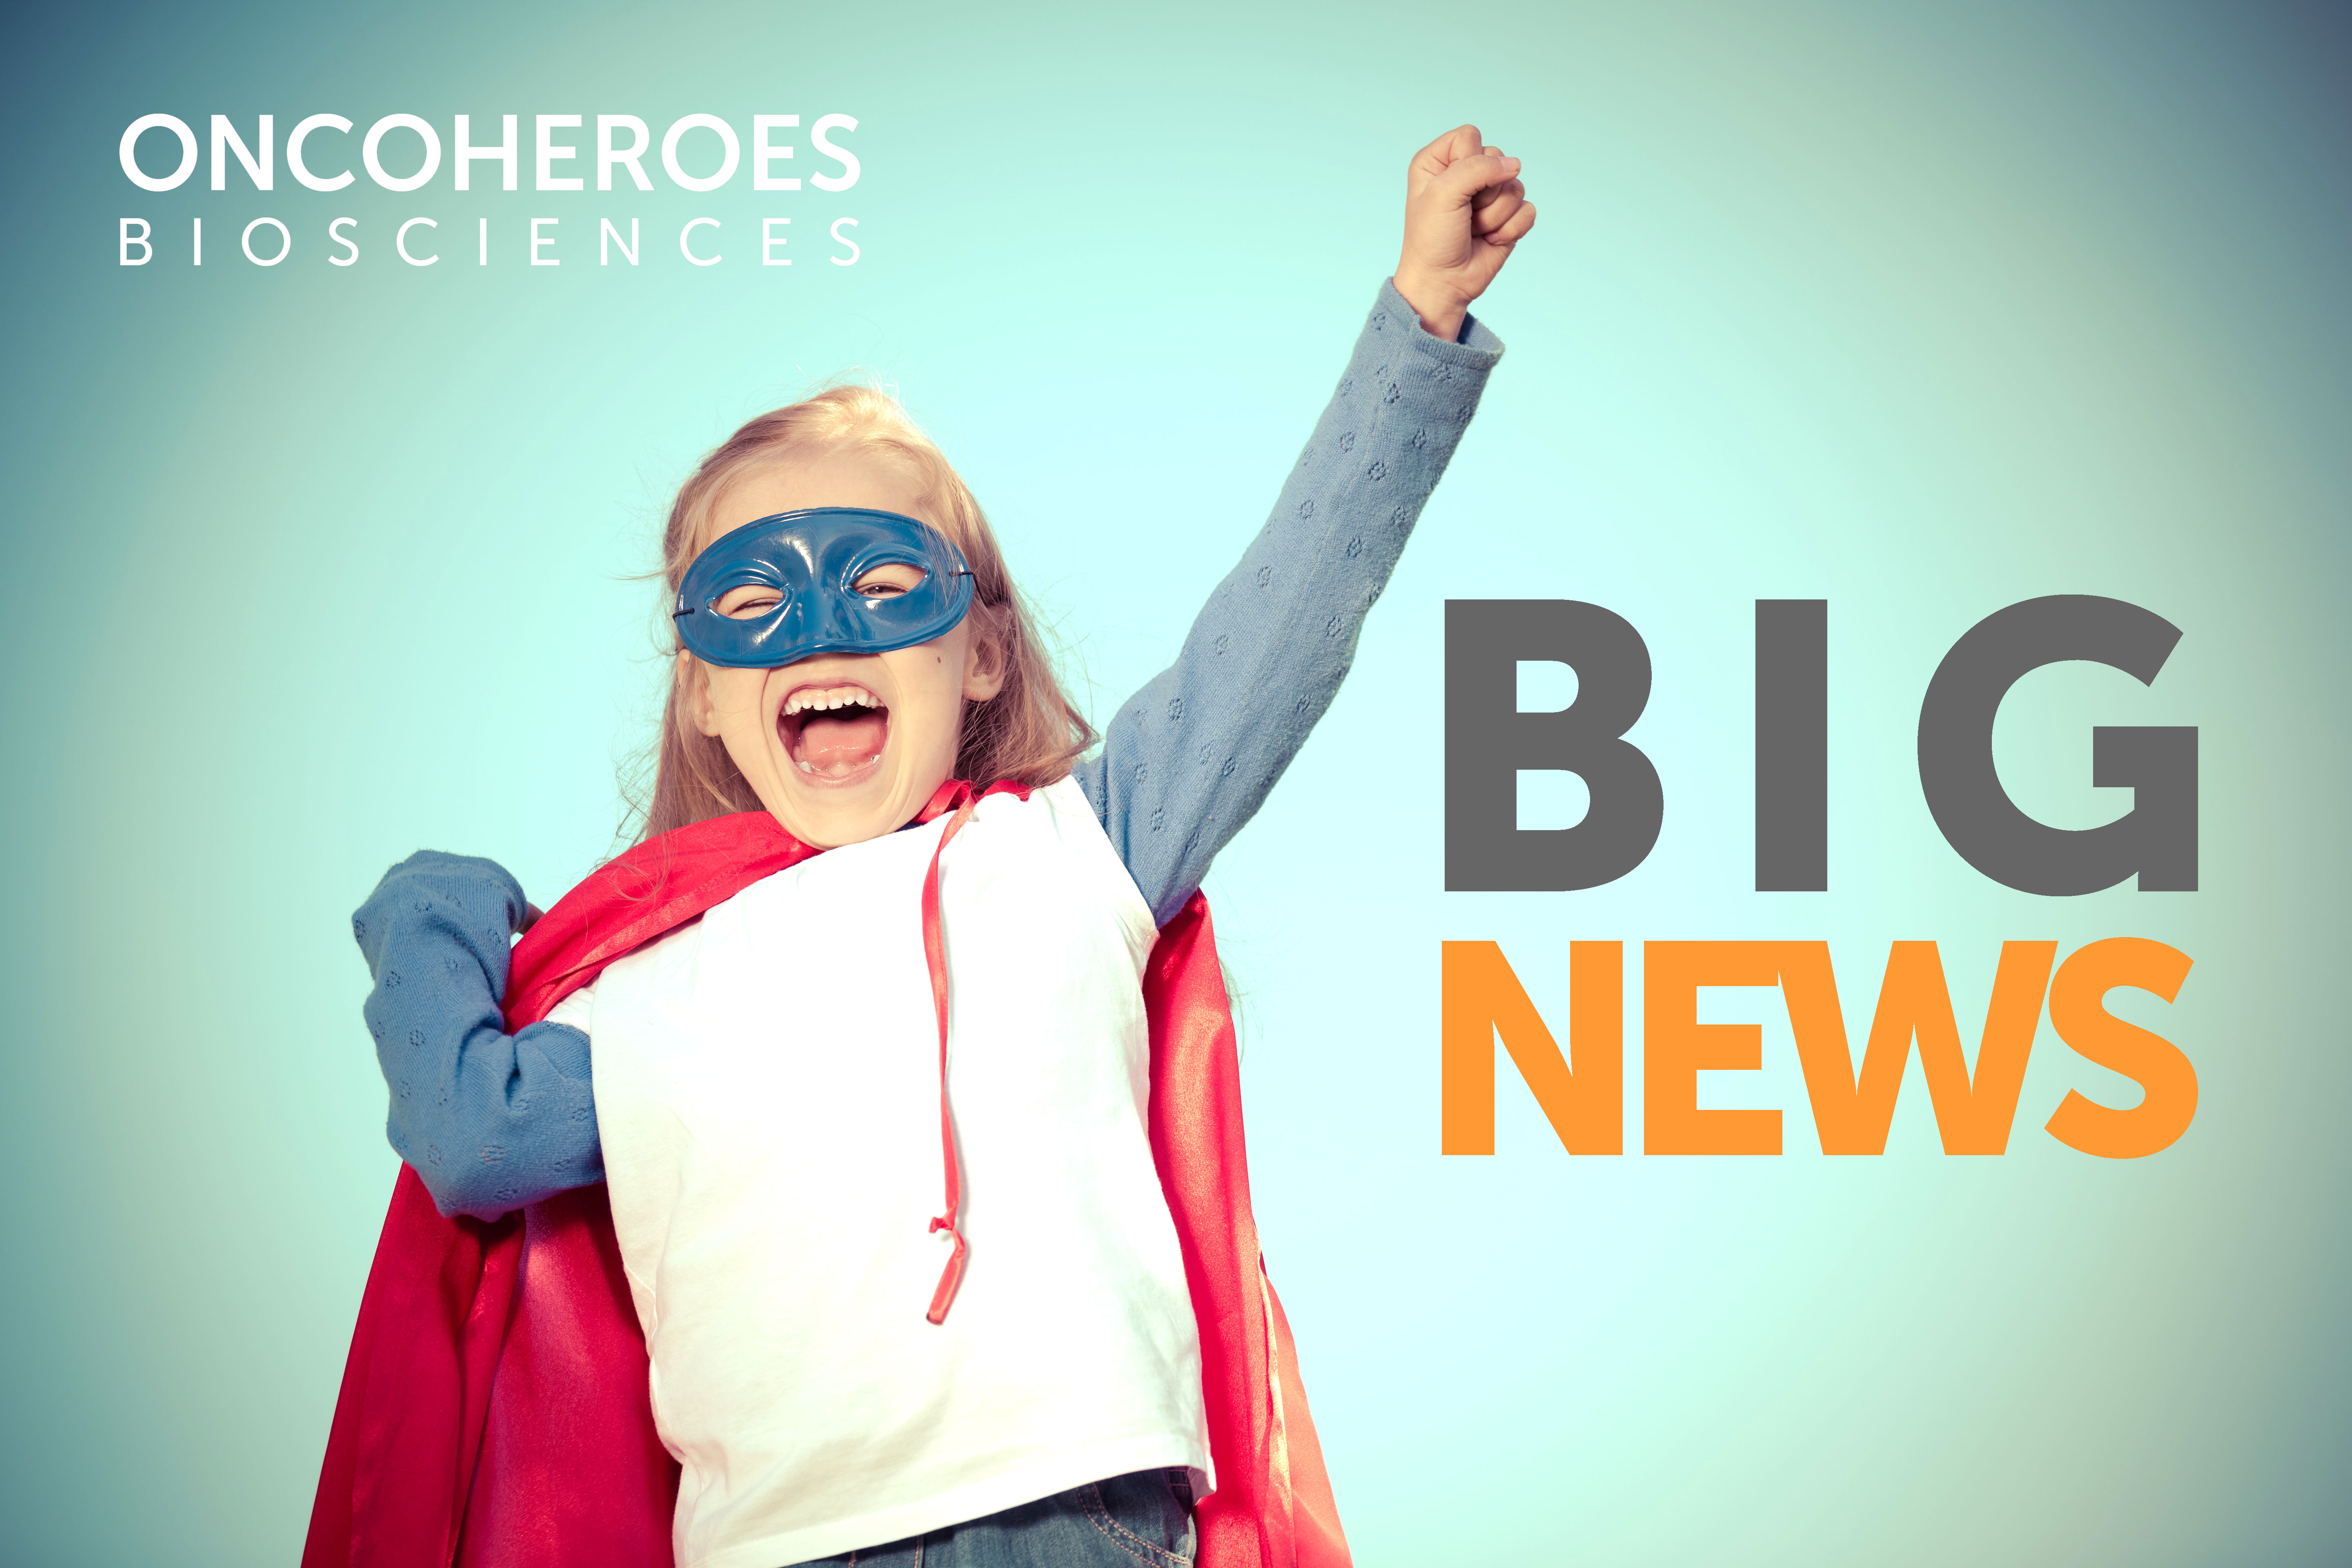 We have big news to share during childhood cancer awareness month